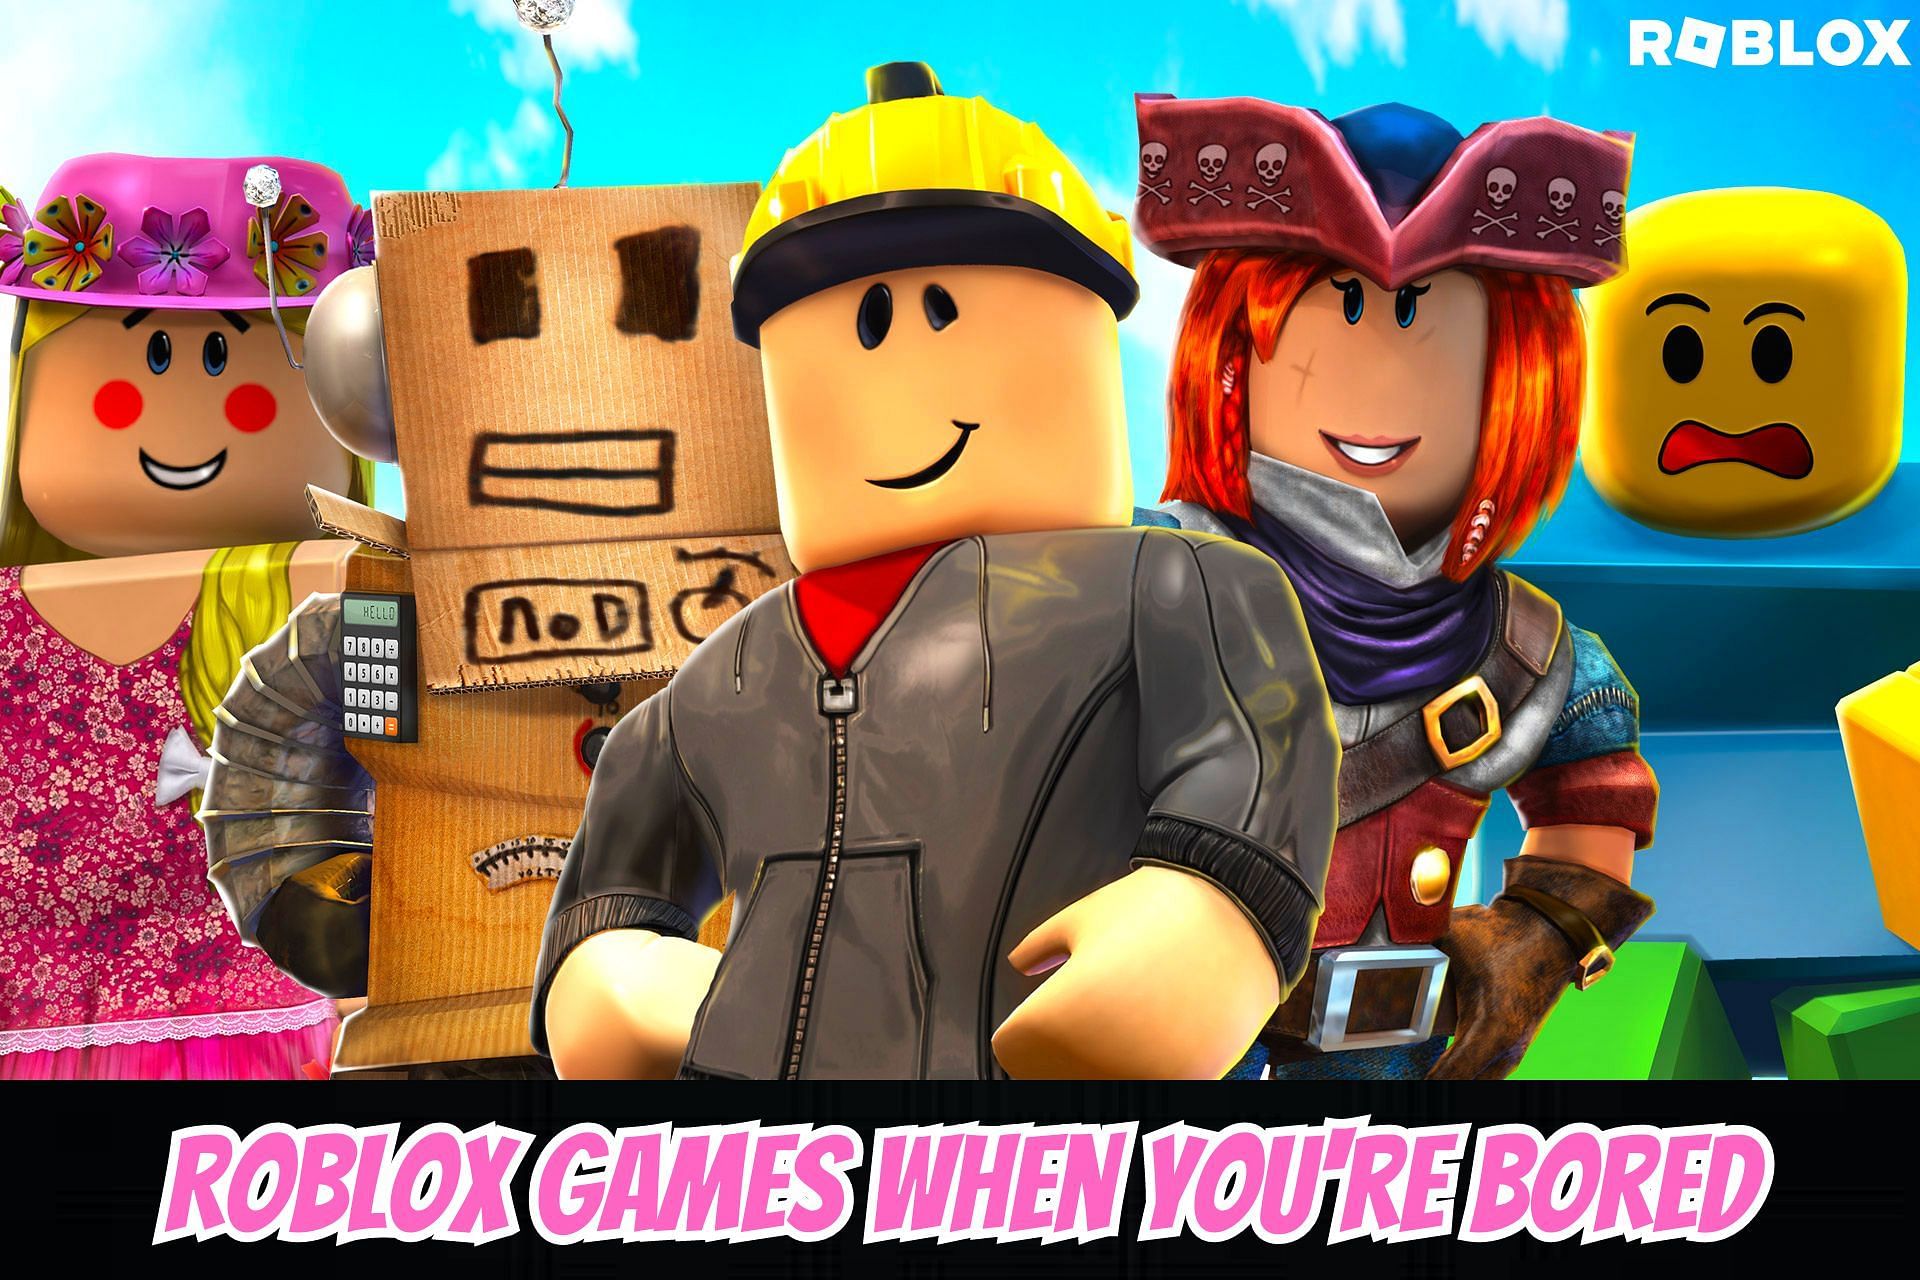 Roblox Games: What is Roblox - How to download Roblox and how to login?, Gaming, Entertainment